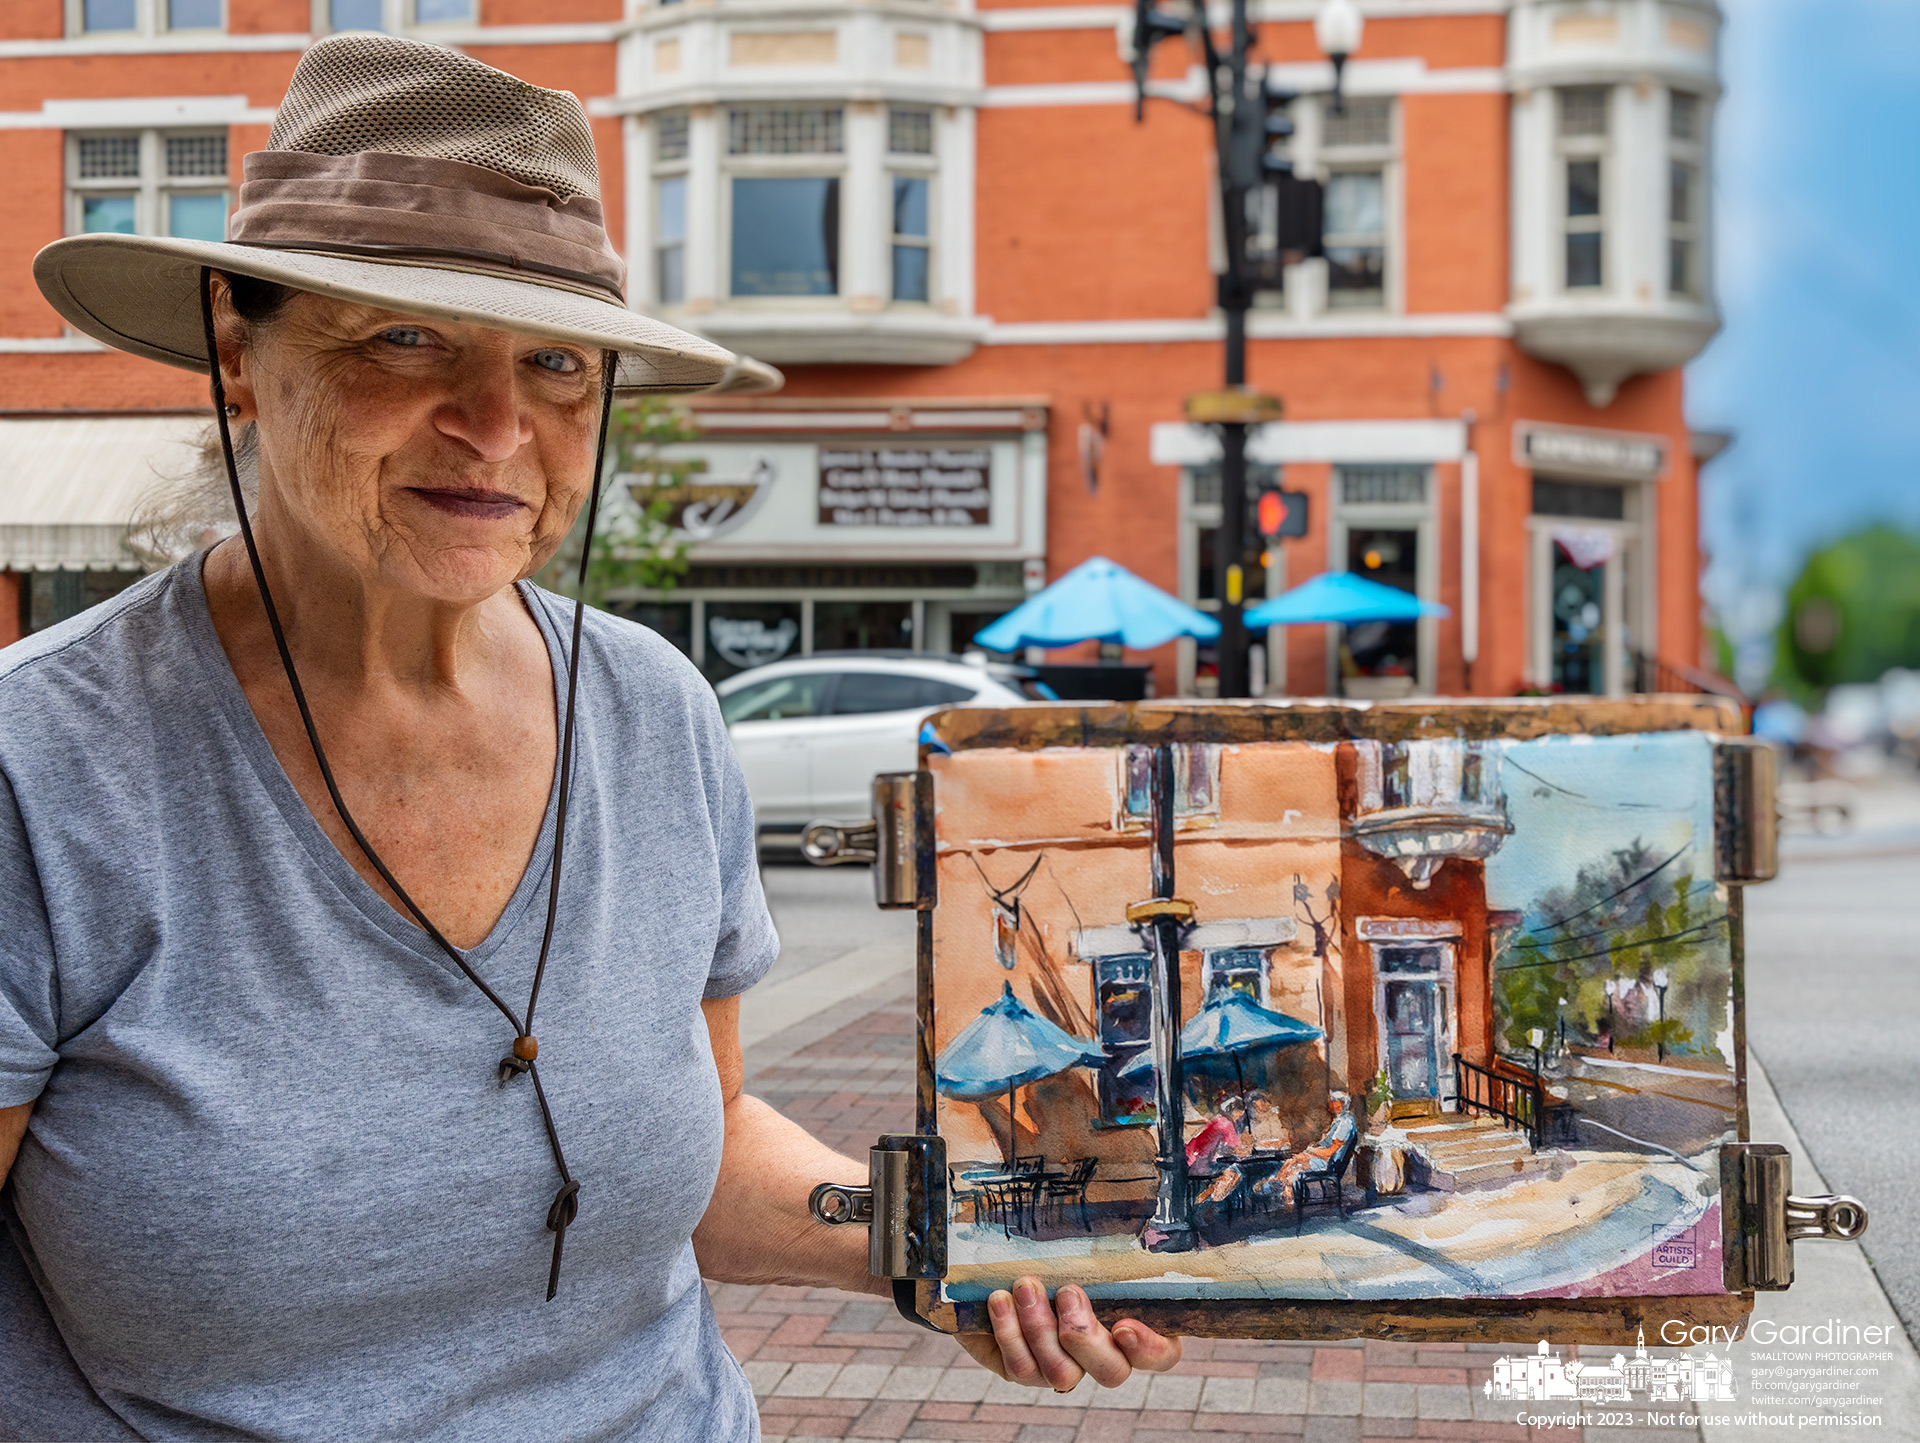 A plein air artist reluctantly holds her artwork saying it's not yet complete as she finishes a session painting at State and Main in Uptown Westerville. My Final Photo for July 18, 2023.